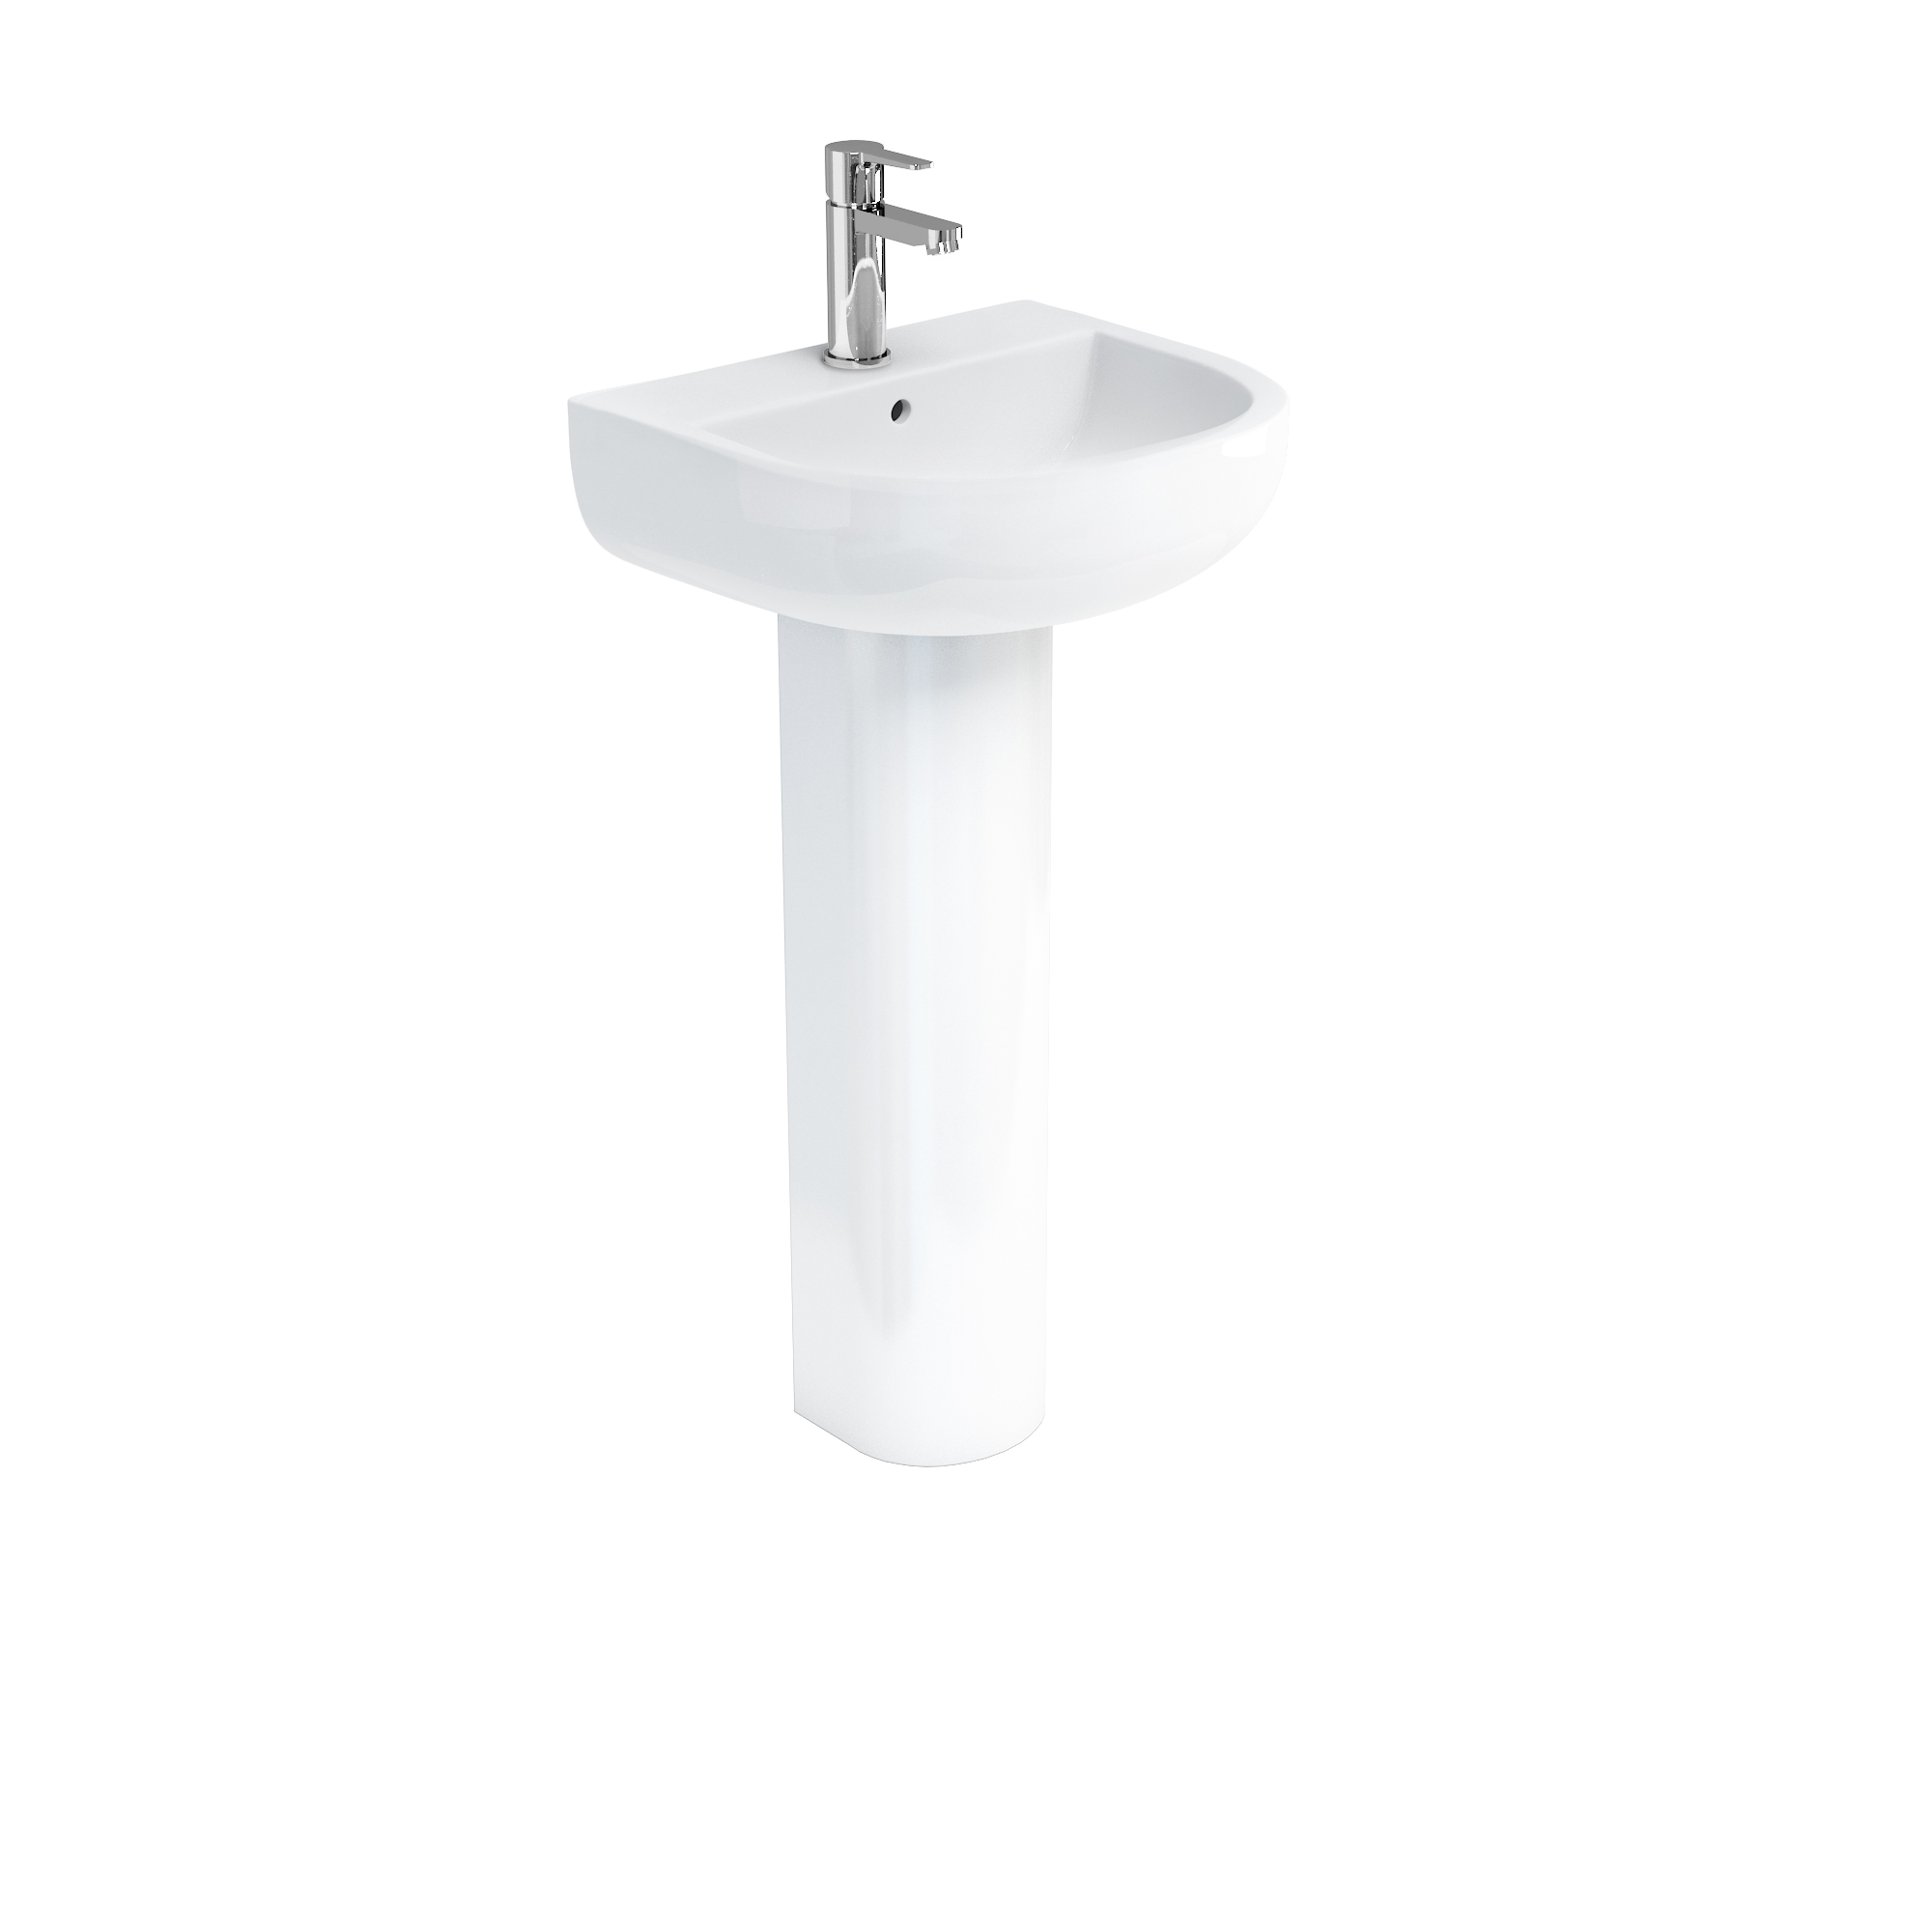 Compact 450 basin and round fronted pedestal